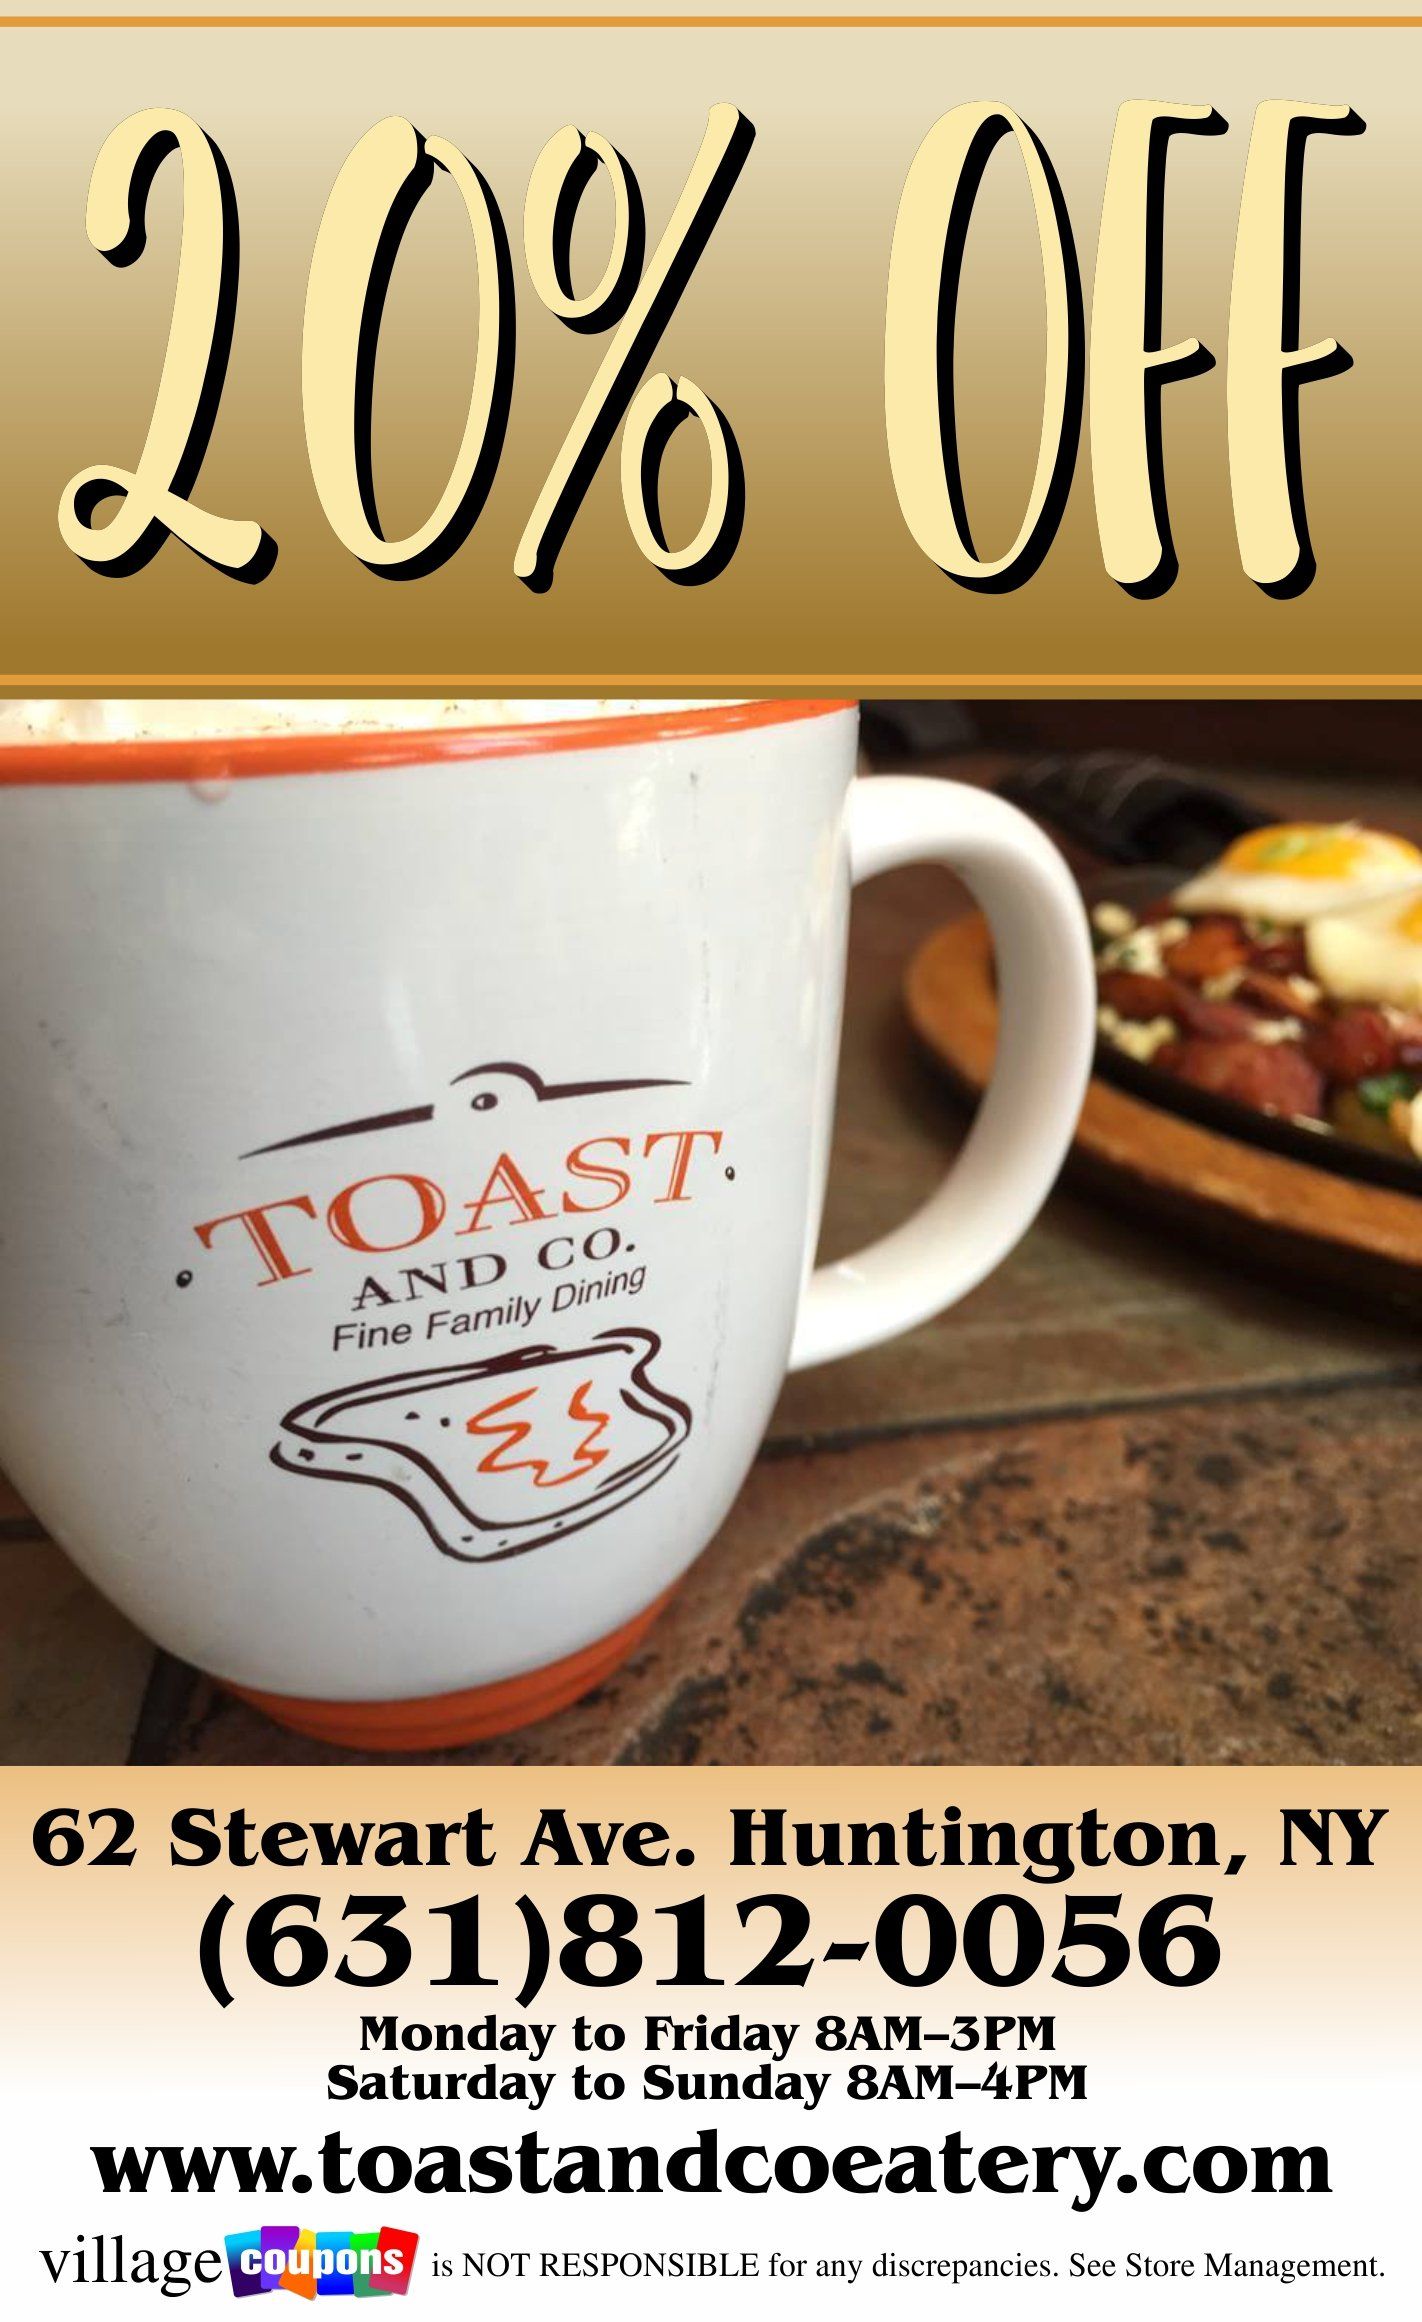 An advertisement for toast and co. in huntington new york